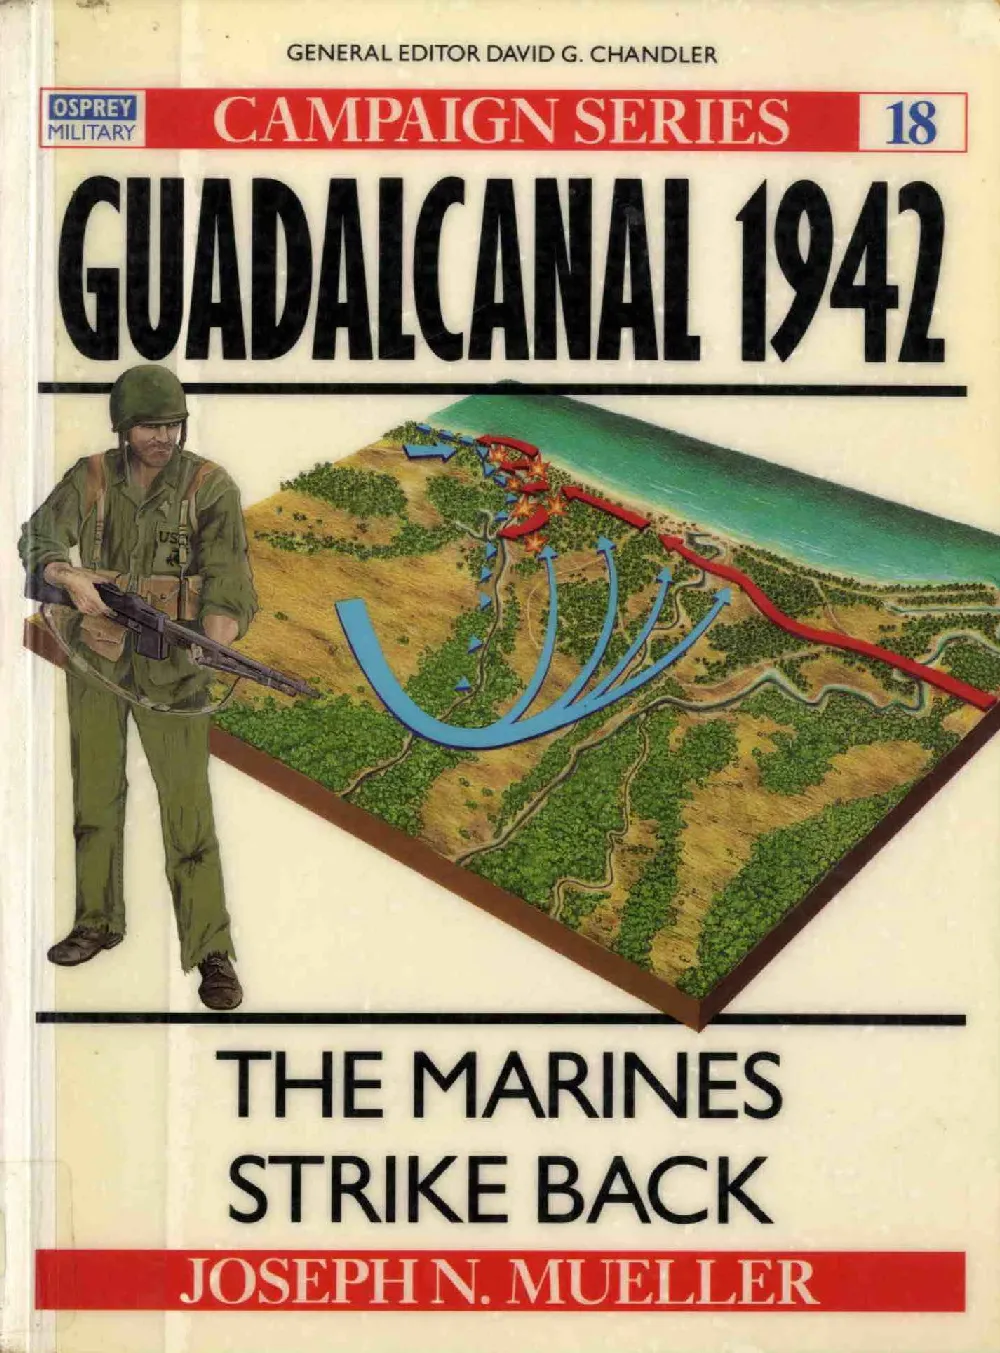 Osprey - Campaign 018 - Guadalcanal 1942 - The Marines Strike Back